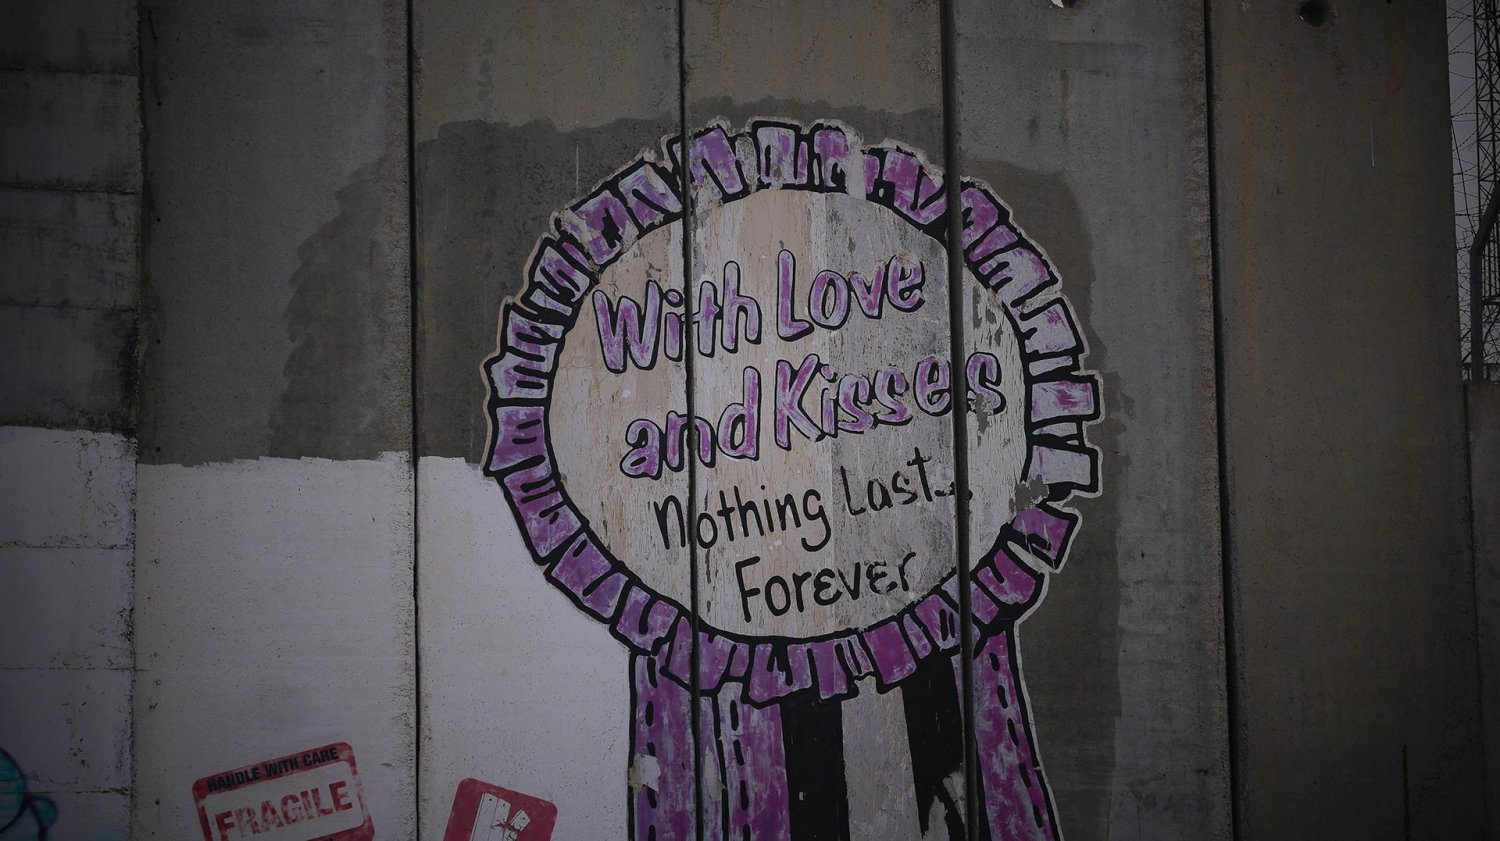 Graffiti reading "Nothing Lasts Forever" on the Separation Wall outside al-Karawan restaurant, 2021